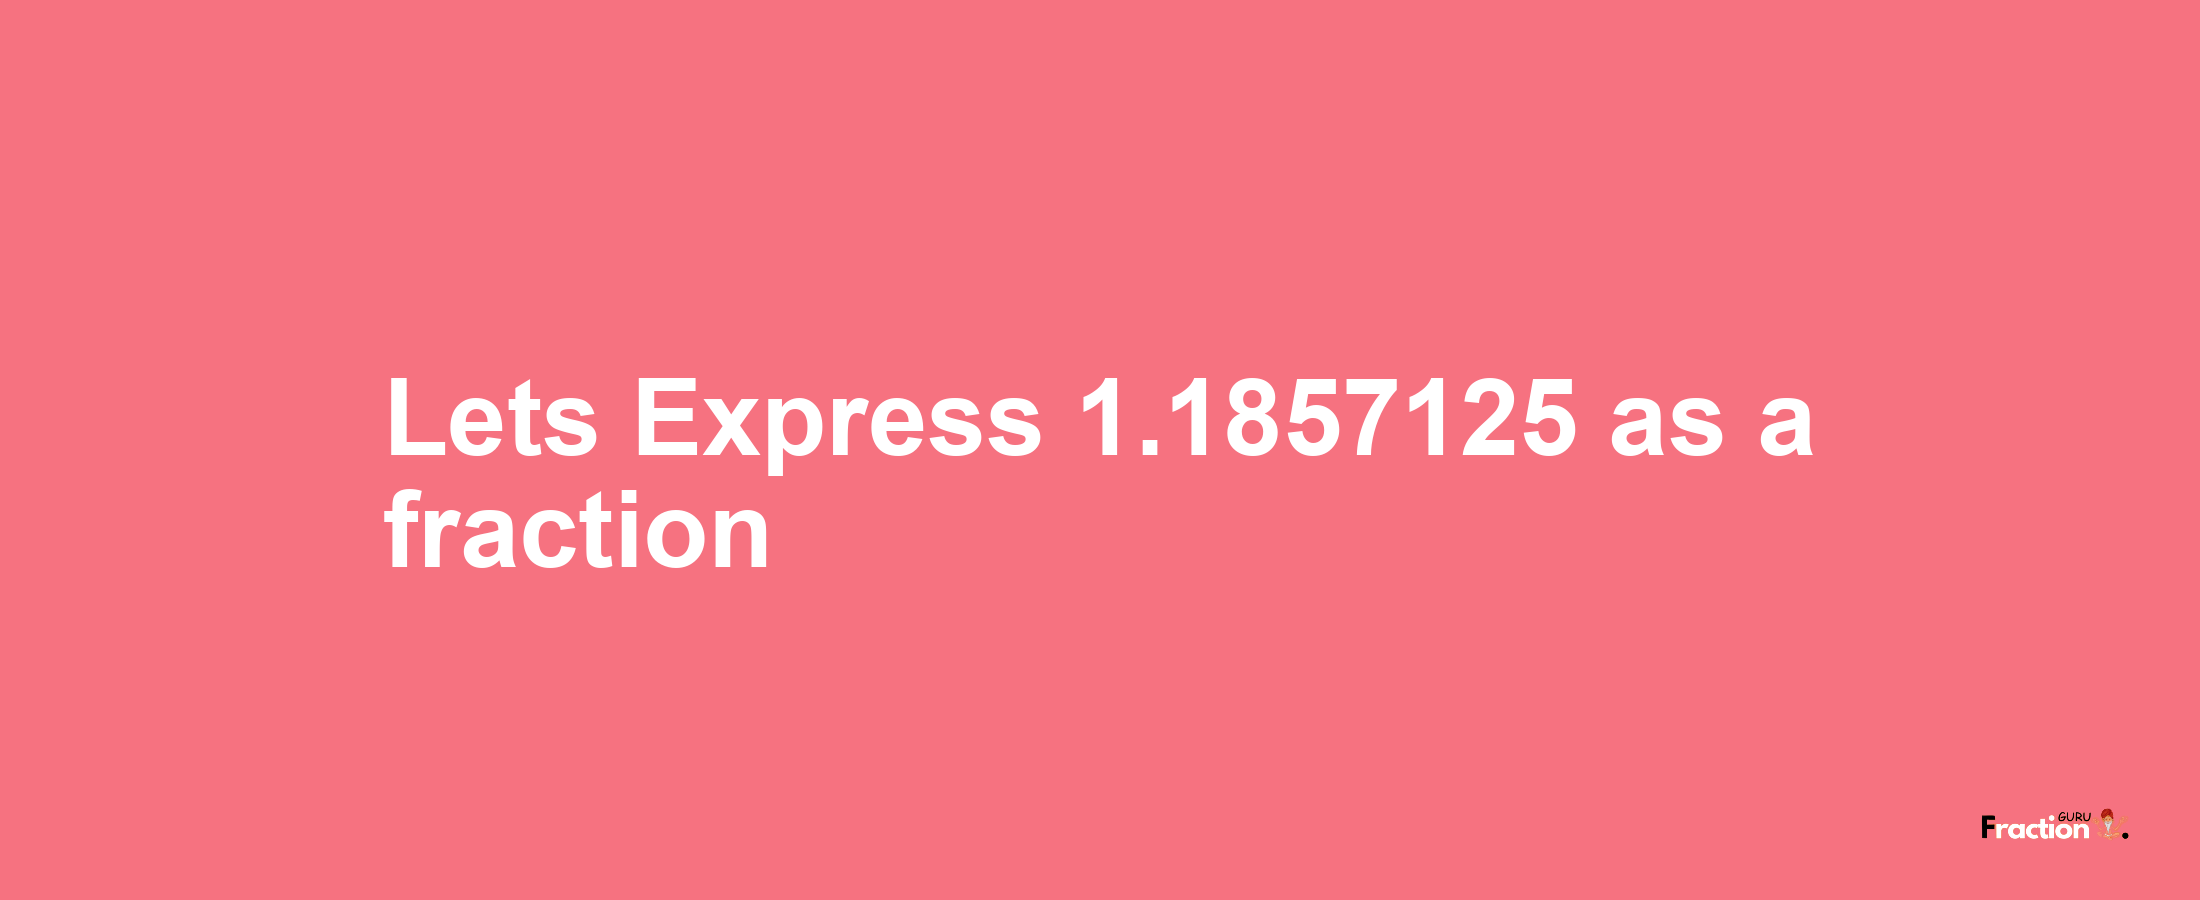 Lets Express 1.1857125 as afraction